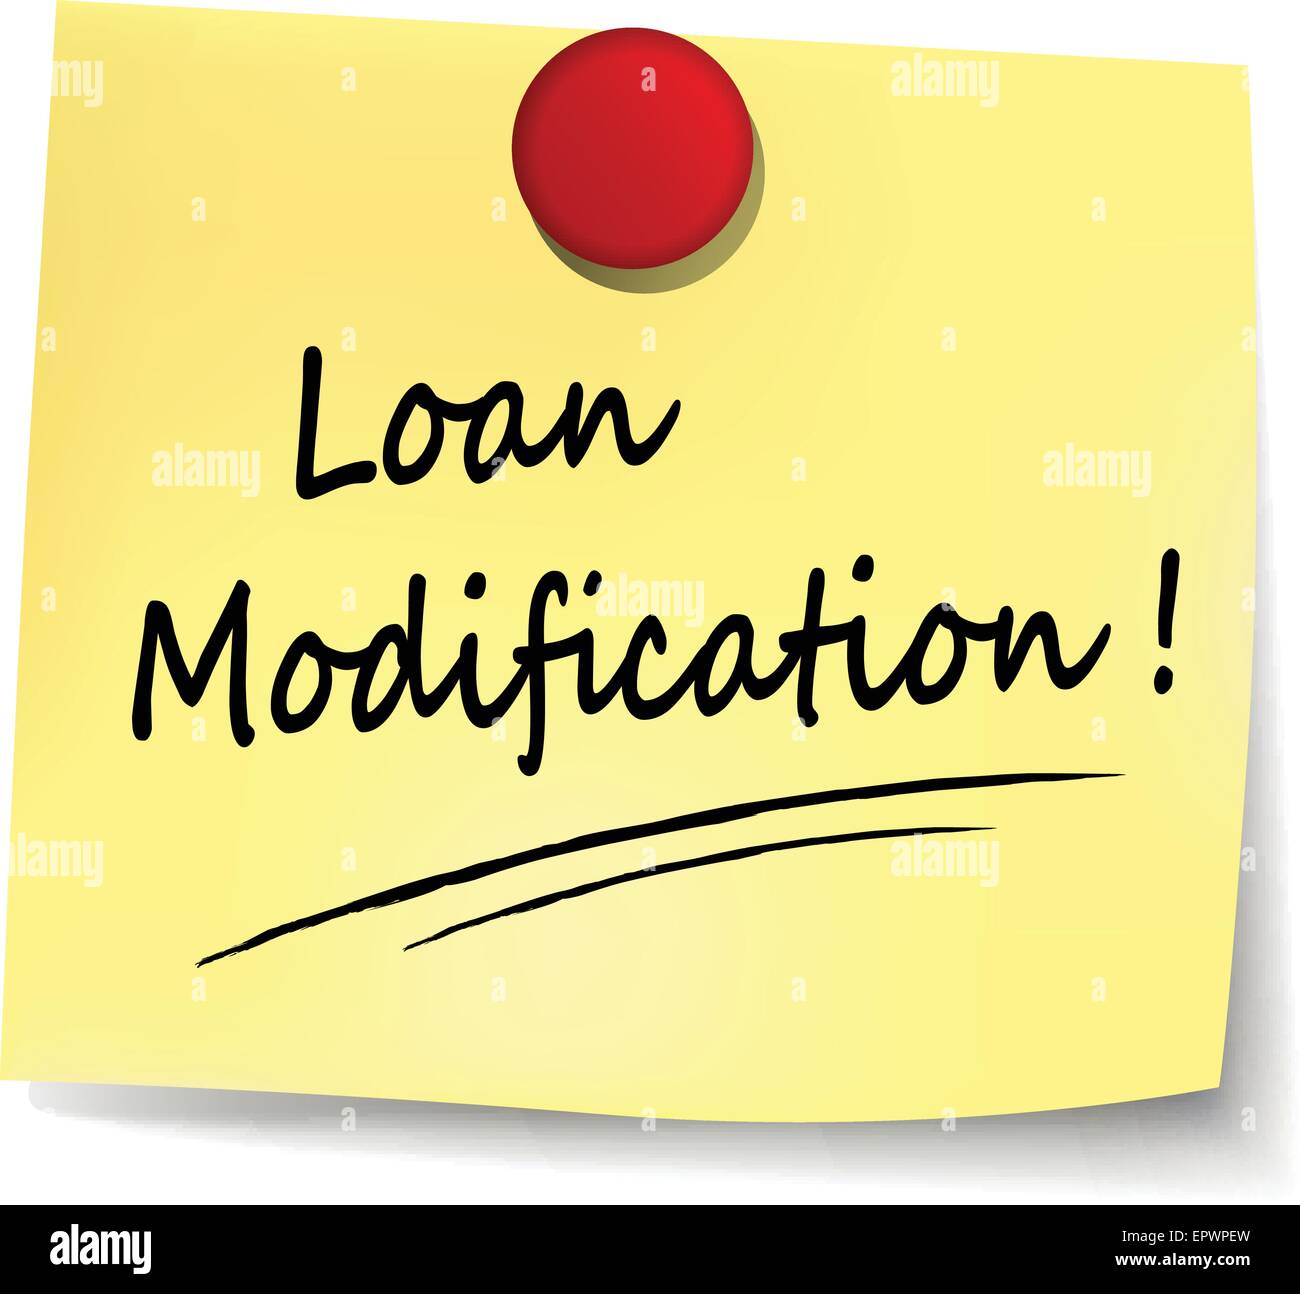 illustration of loan modification note on white background Stock Vector